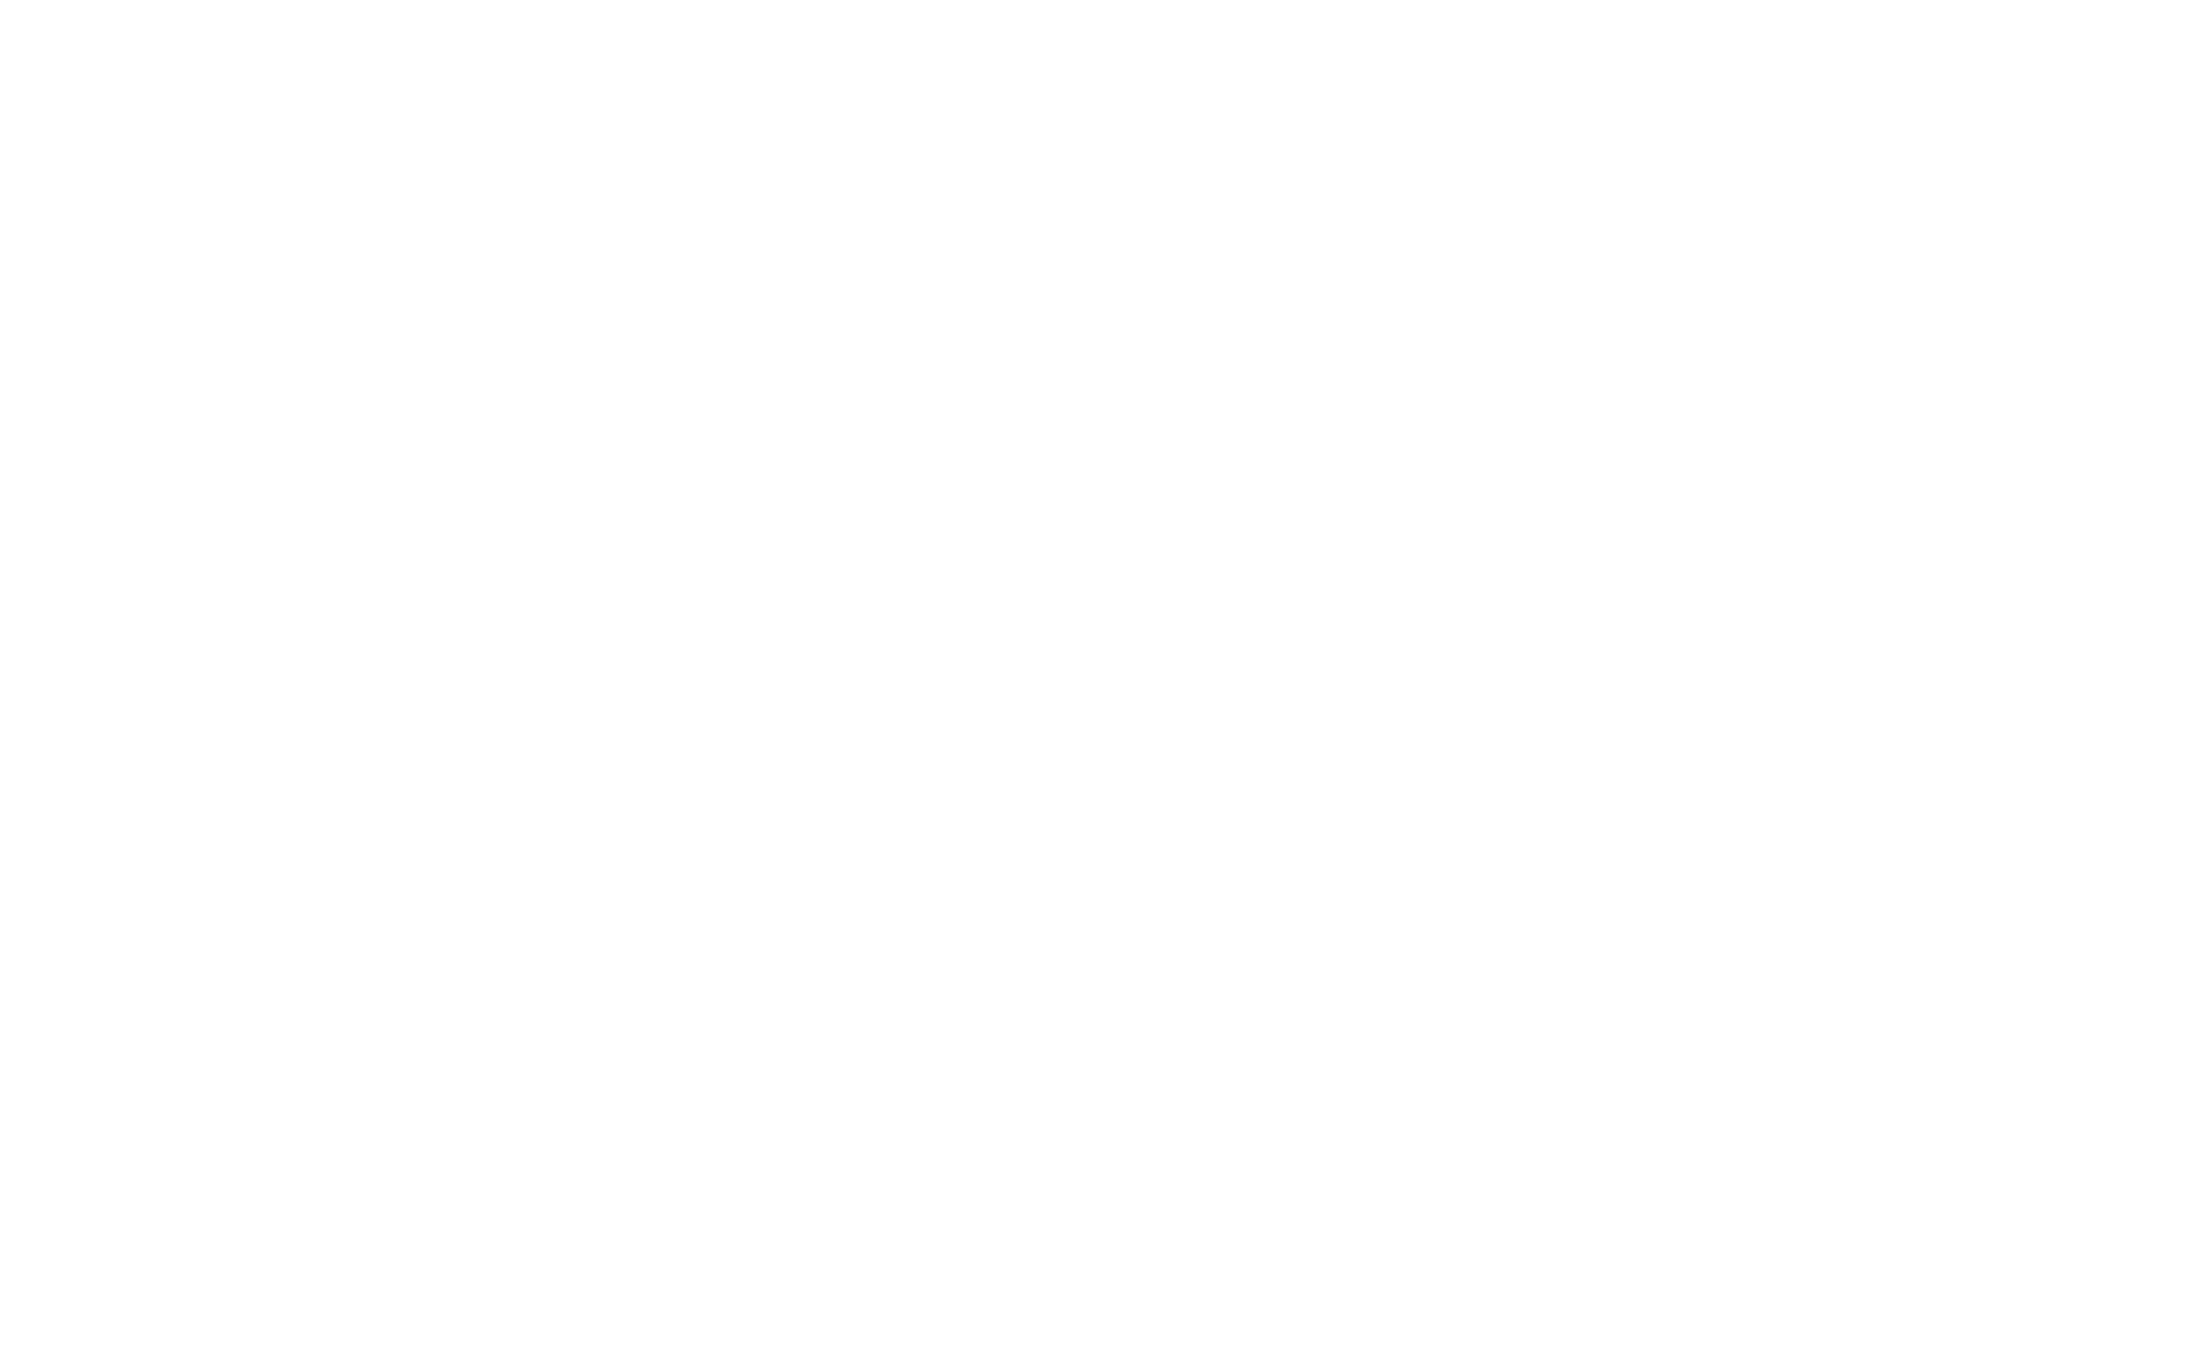 INTRODUCING OUR BRAND